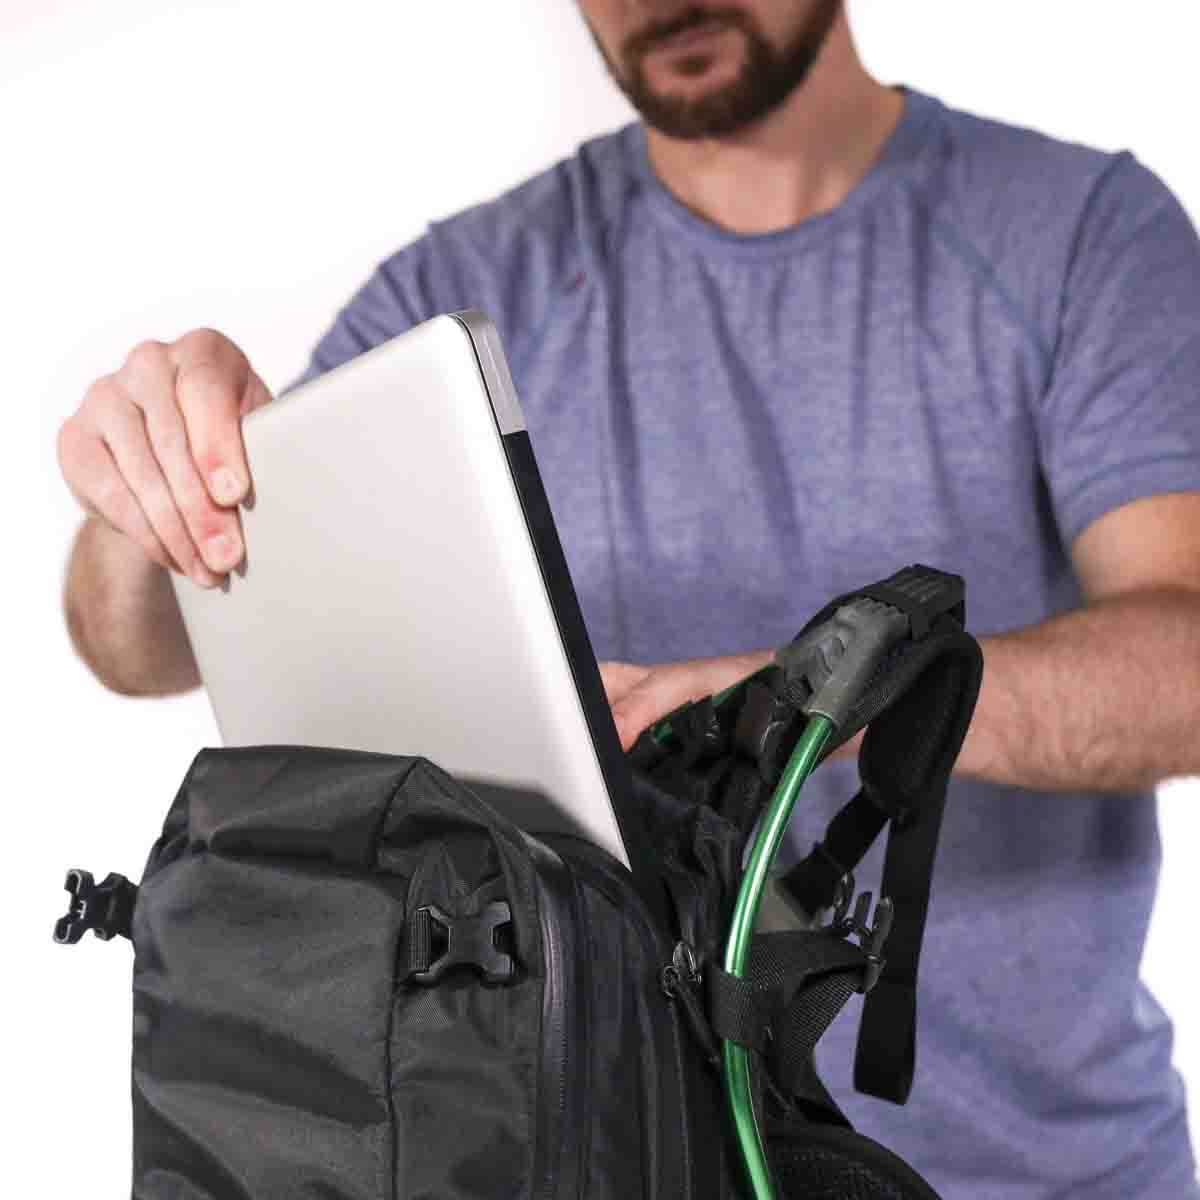 Motionlab active commute bag product design innovation functionality